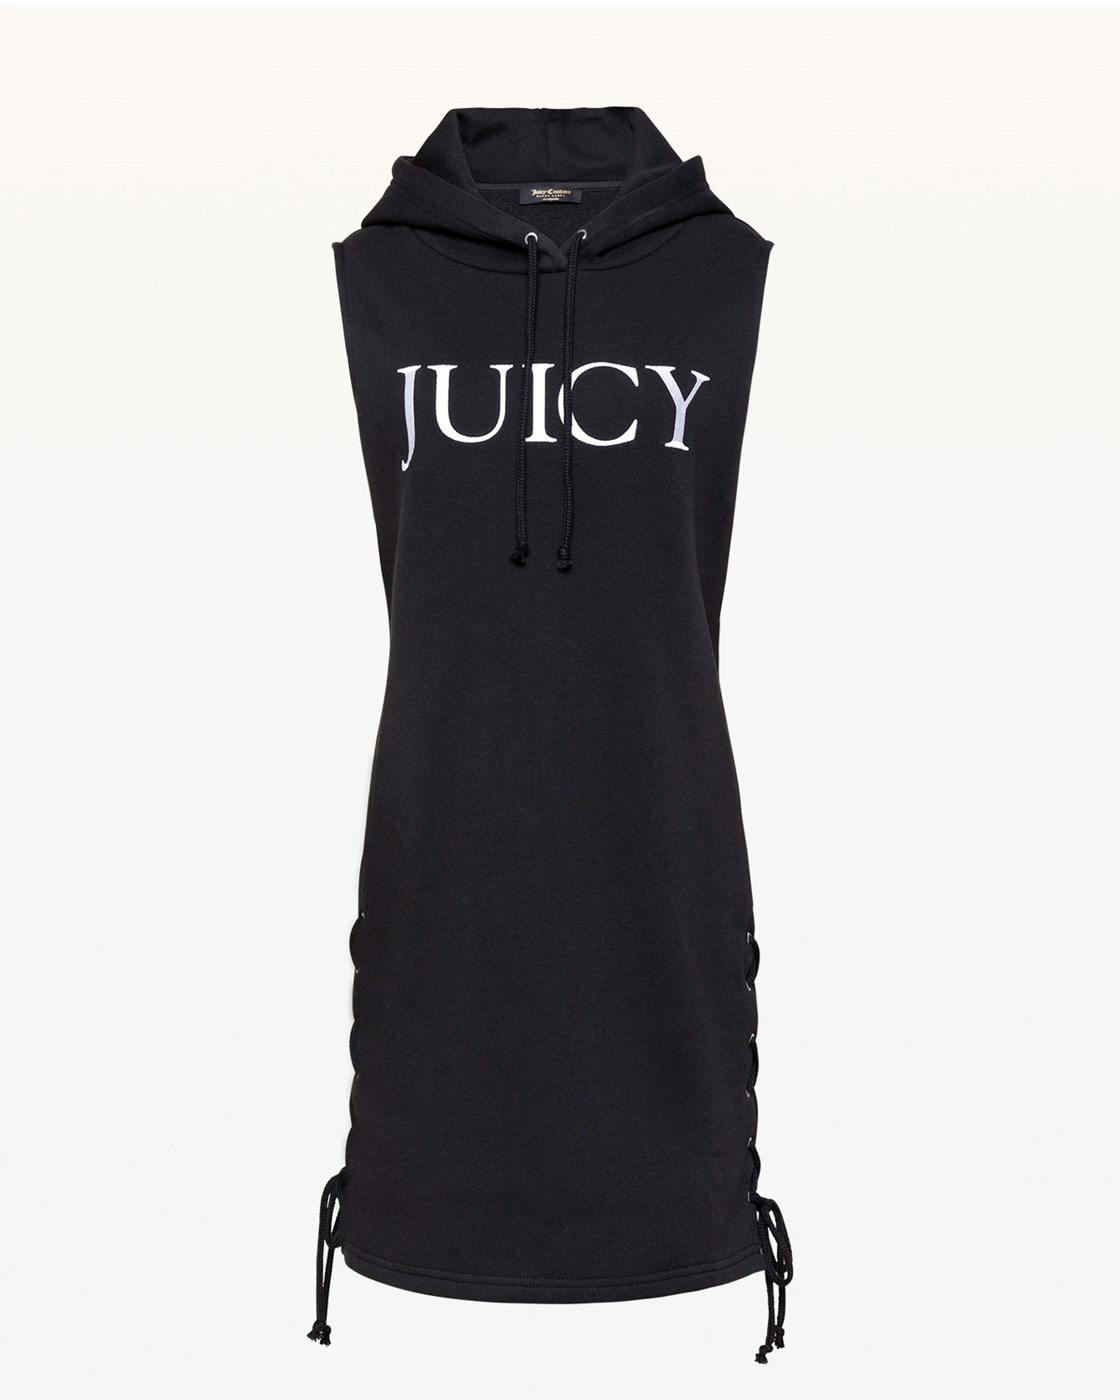 Juicy Couture Fleece Side Lace Up Sleeveless Dress